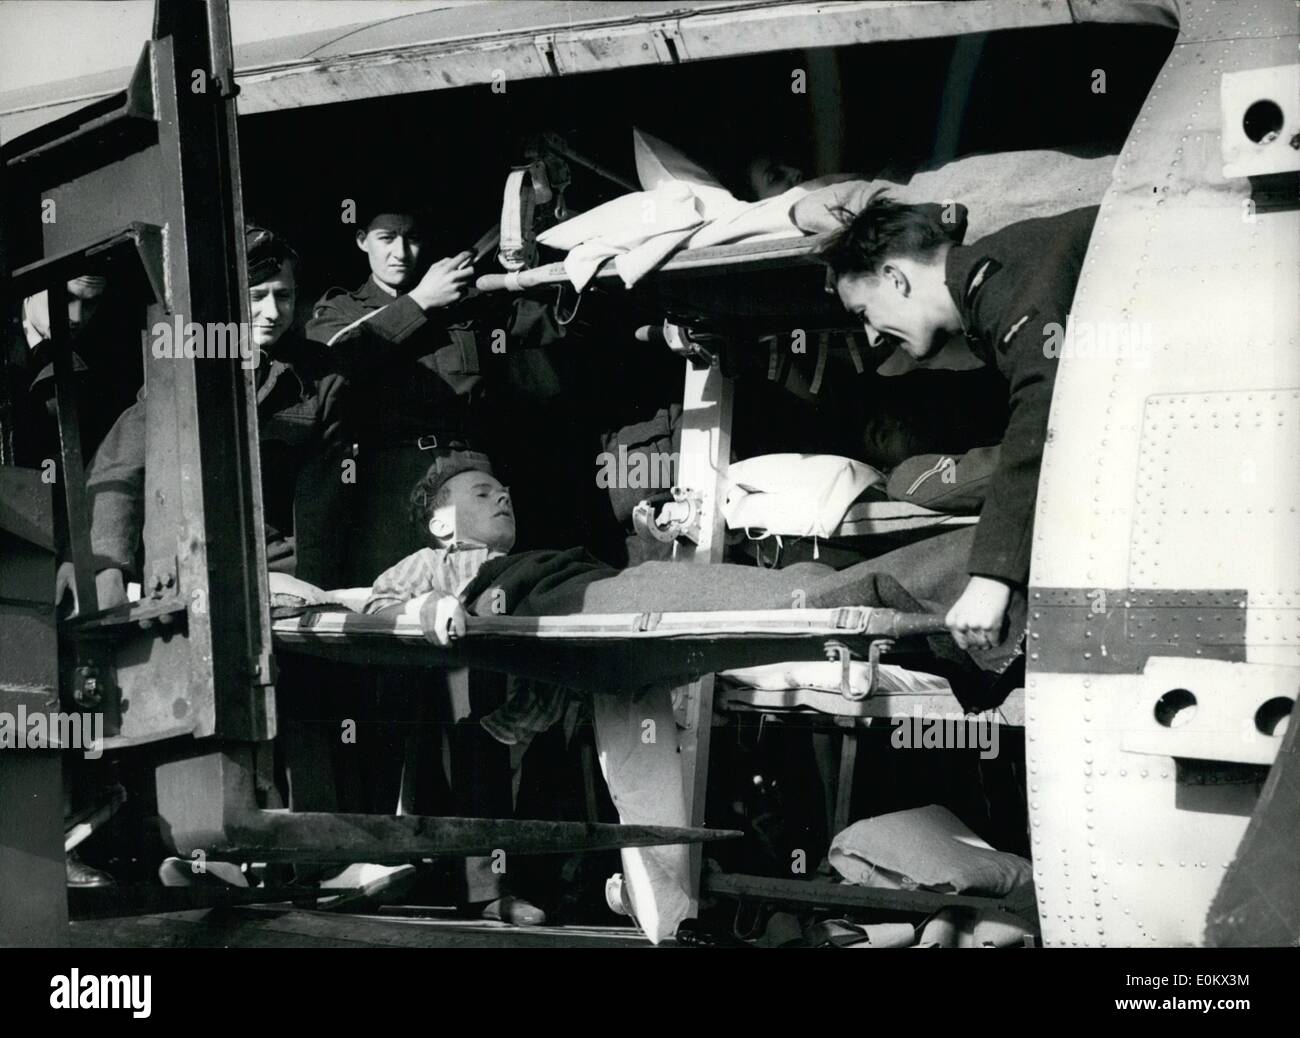 Sep. 09, 1950 - Wounded flown from far east The first trip of an air ambulance which is bribing home casualties from the far east was completed last night. A Hastings plane landed at lyneham R.A.F. Station, Wiltshire, carrying 32 wounded and sick, 10 of them stretcher cases. Mont of them, from Malaya, boarded the plane at Singapore, The service will operates twice a month. none was from Korea but the service will deal with casualties from there if necessary. Photo shows Private c.f Stock Photo